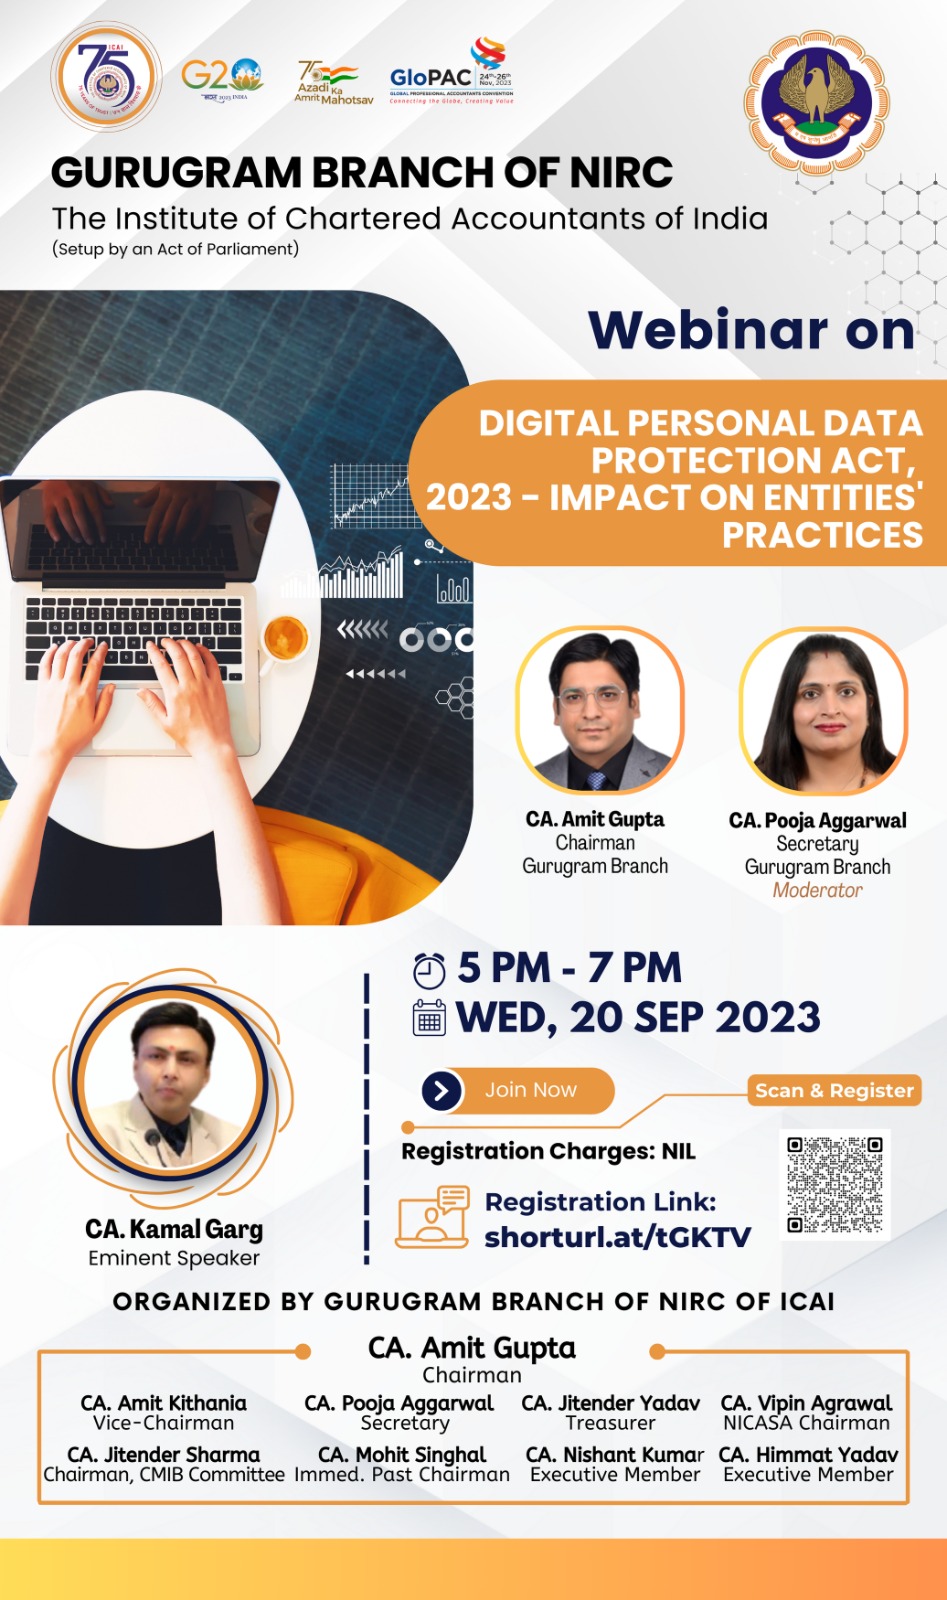 Webinar on Digital Personal Data Protection Act, 2023 - impact on entities' practices